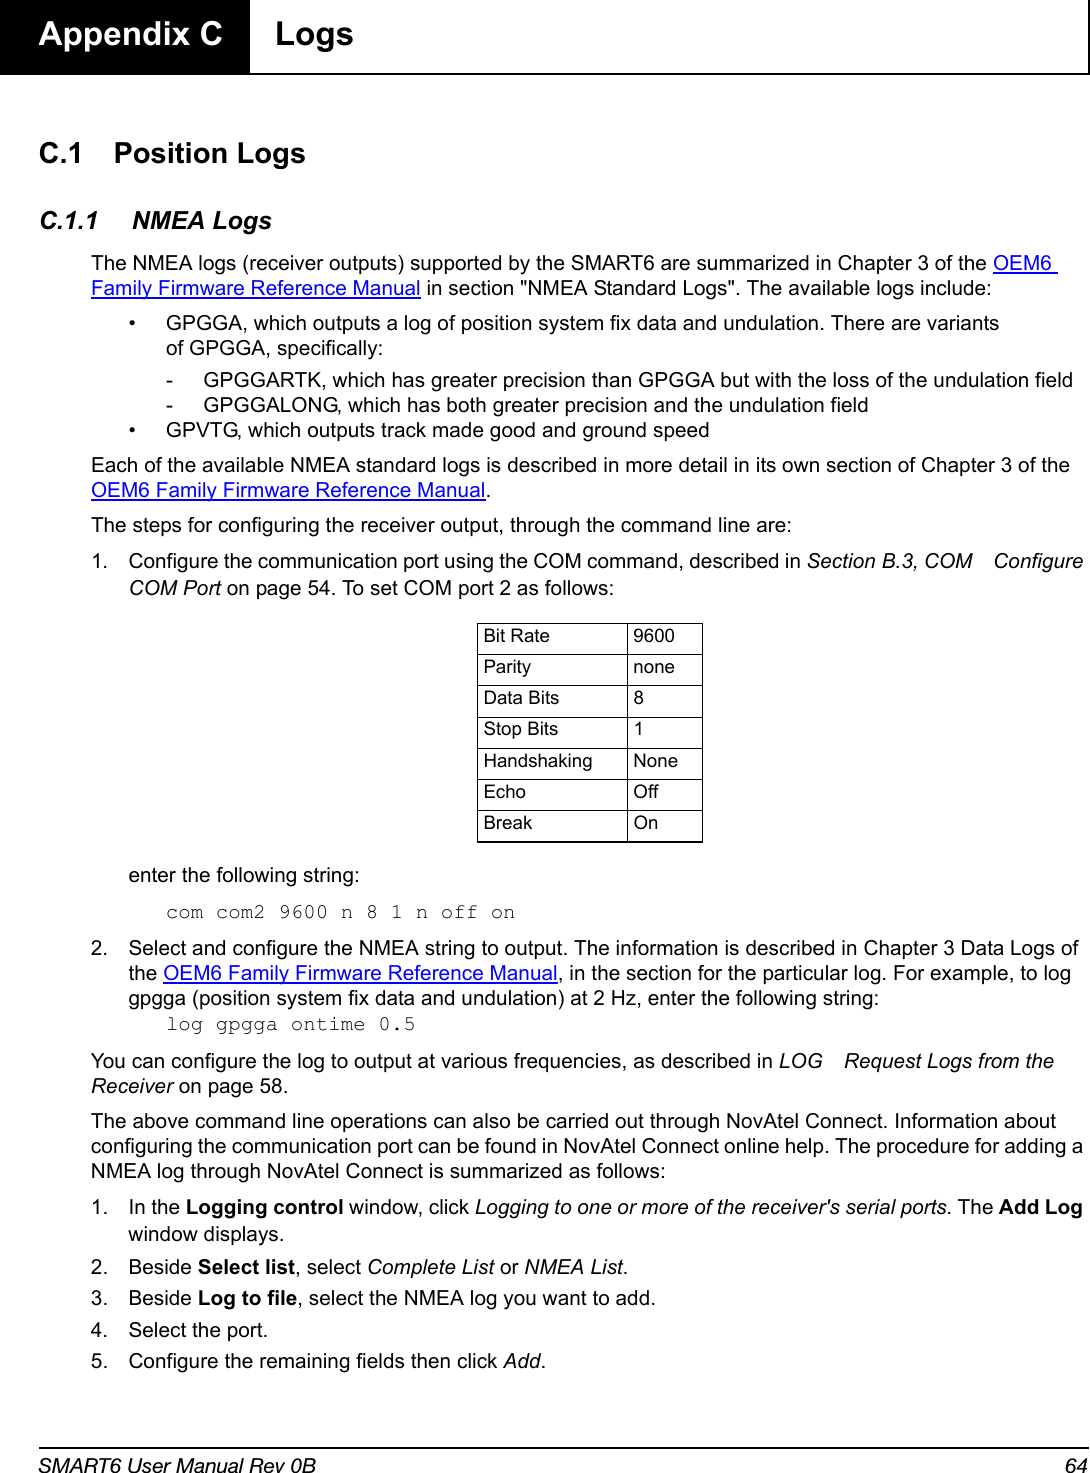 SMART6 User Manual Rev 0B 64Appendix C  LogsC.1 Position LogsC.1.1 NMEA LogsThe NMEA logs (receiver outputs) supported by the SMART6 are summarized in Chapter 3 of the OEM6 Family Firmware Reference Manual in section &quot;NMEA Standard Logs&quot;. The available logs include:• GPGGA, which outputs a log of position system fix data and undulation. There are variants of GPGGA, specifically:- GPGGARTK, which has greater precision than GPGGA but with the loss of the undulation field- GPGGALONG, which has both greater precision and the undulation field • GPVTG, which outputs track made good and ground speedEach of the available NMEA standard logs is described in more detail in its own section of Chapter 3 of the OEM6 Family Firmware Reference Manual.The steps for configuring the receiver output, through the command line are:1. Configure the communication port using the COM command, described in Section B.3, COM Configure COM Port on page 54. To set COM port 2 as follows:enter the following string:com com2 9600 n 8 1 n off on2. Select and configure the NMEA string to output. The information is described in Chapter 3 Data Logs of the OEM6 Family Firmware Reference Manual, in the section for the particular log. For example, to log gpgga (position system fix data and undulation) at 2 Hz, enter the following string:log gpgga ontime 0.5You can configure the log to output at various frequencies, as described in LOG Request Logs from the Receiver on page 58.The above command line operations can also be carried out through NovAtel Connect. Information about configuring the communication port can be found in NovAtel Connect online help. The procedure for adding a NMEA log through NovAtel Connect is summarized as follows:1. In the Logging control window, click Logging to one or more of the receiver&apos;s serial ports. The Add Log window displays.2. Beside Select list, select Complete List or NMEA List.3. Beside Log to file, select the NMEA log you want to add.4. Select the port.5. Configure the remaining fields then click Add.Bit Rate 9600Parity noneData Bits 8Stop Bits 1Handshaking NoneEcho OffBreak On